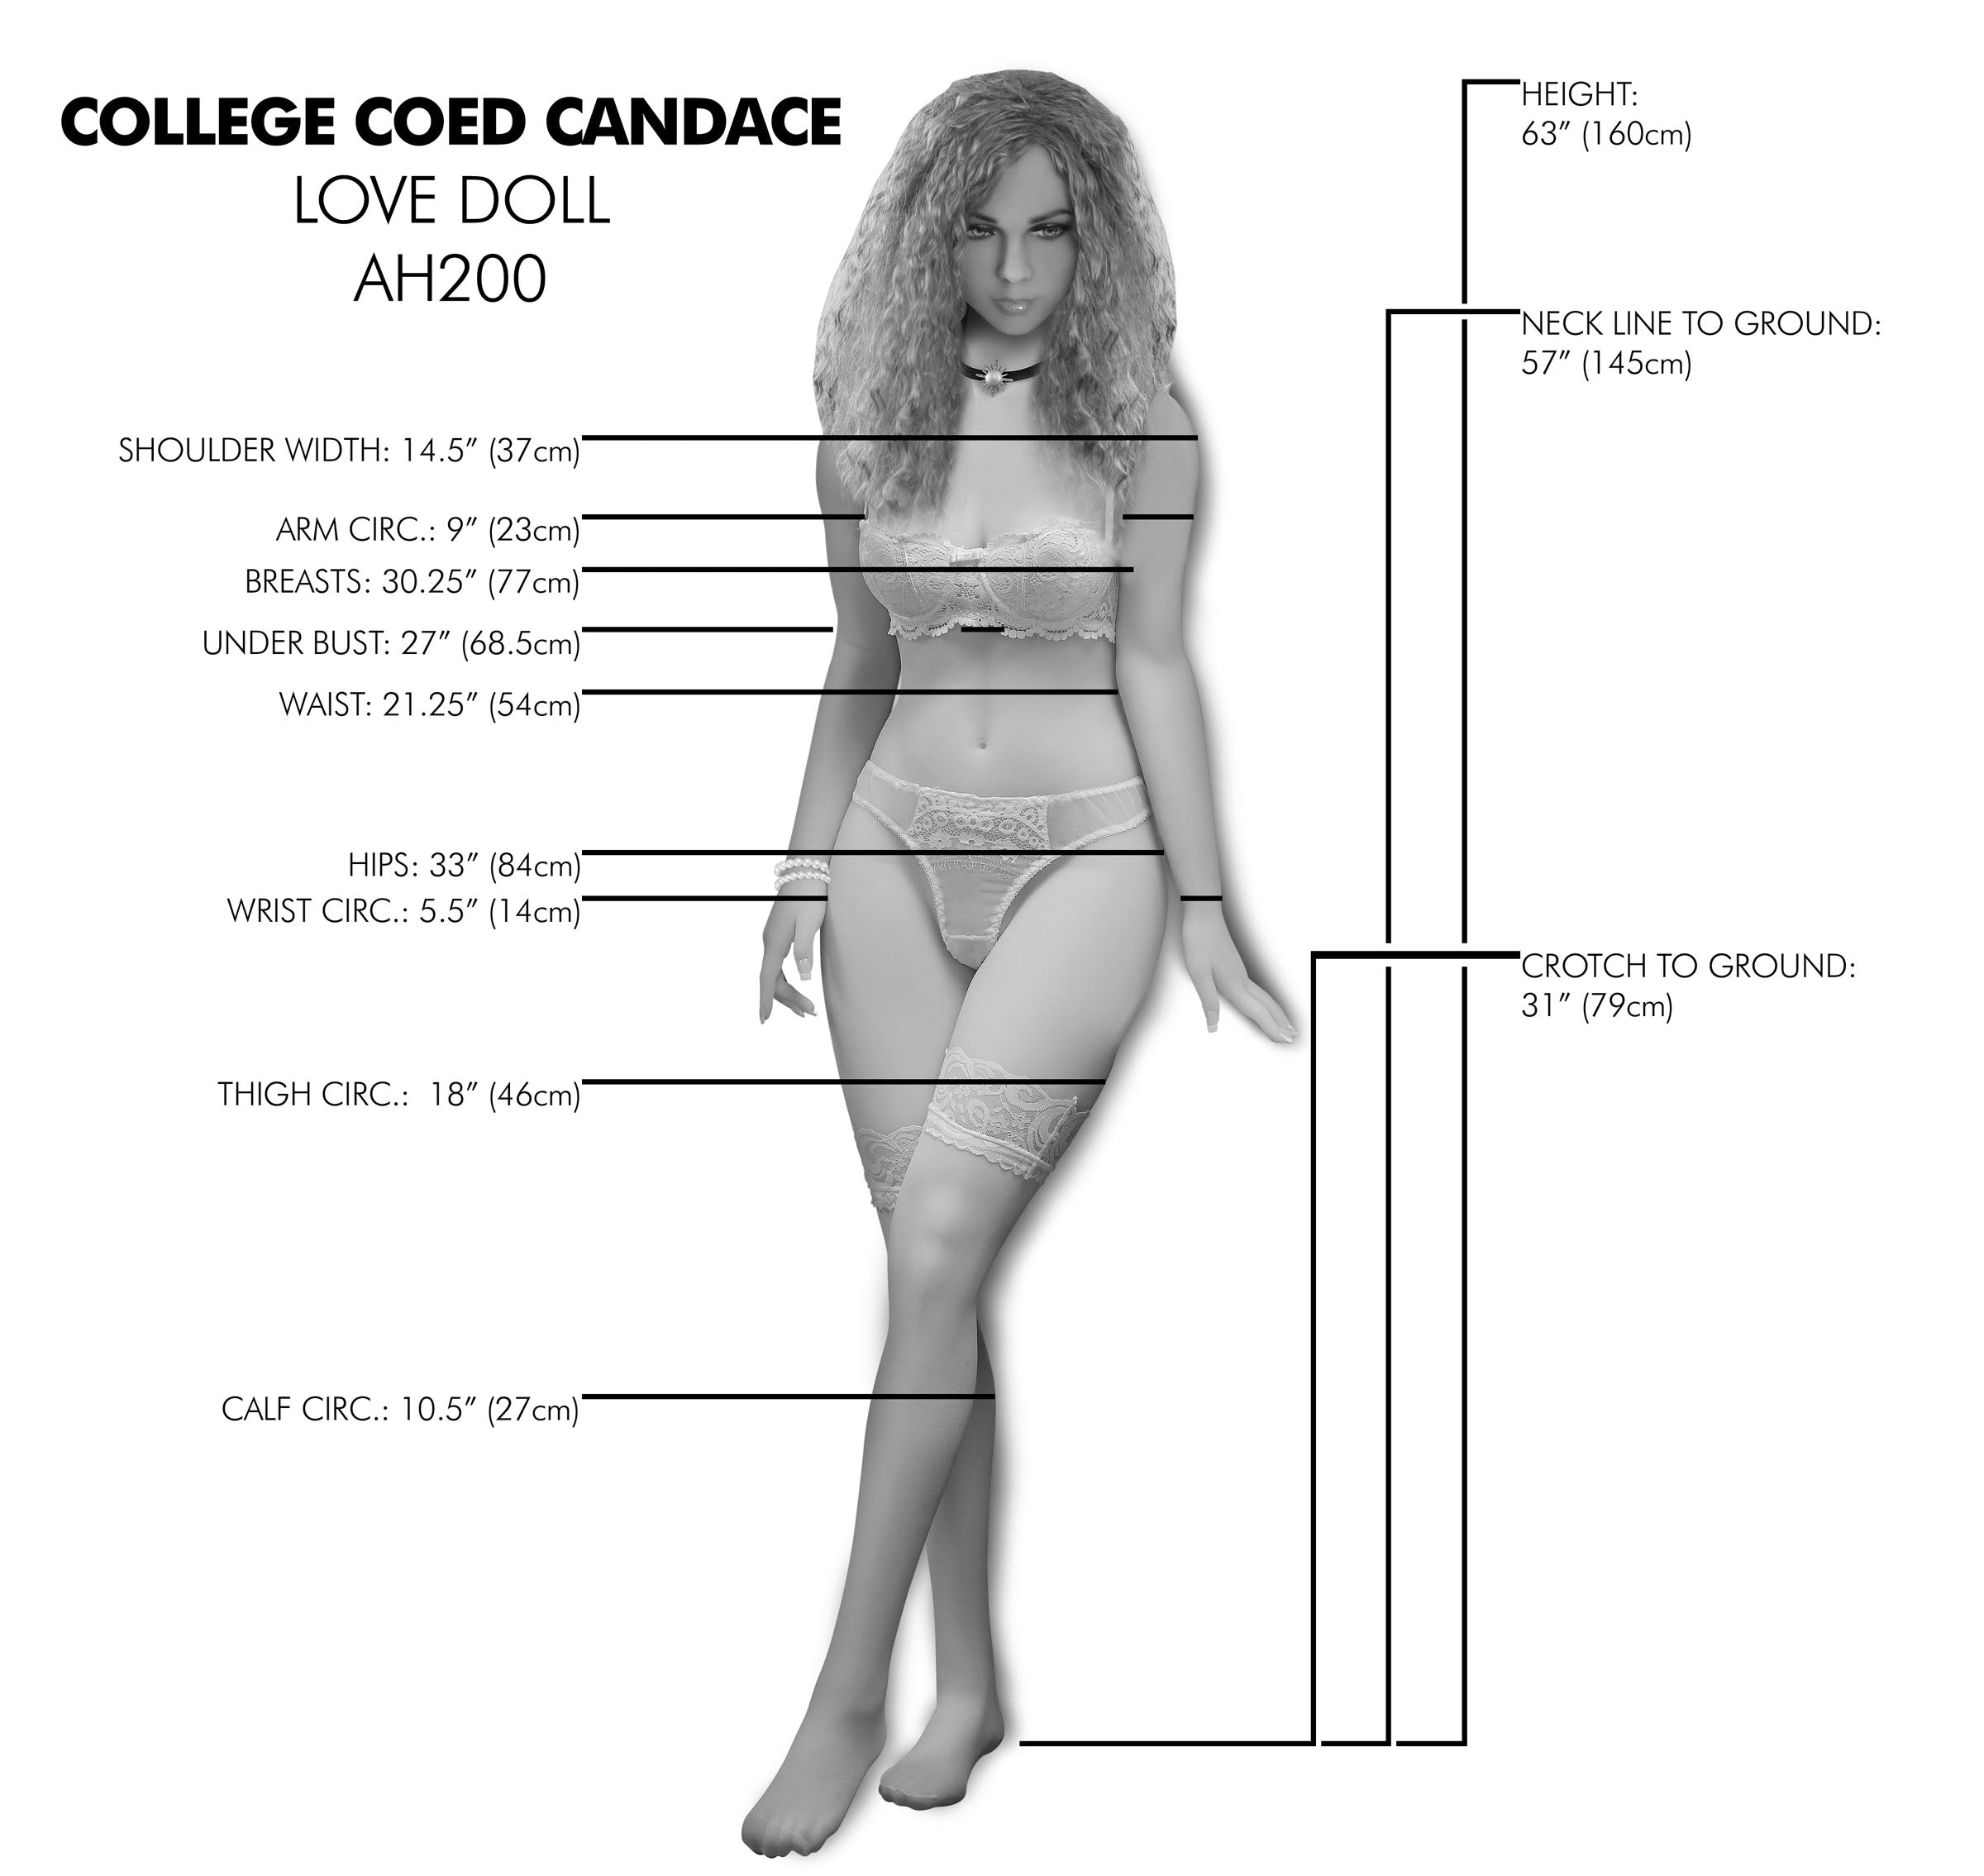 College Coed Candace Love Doll